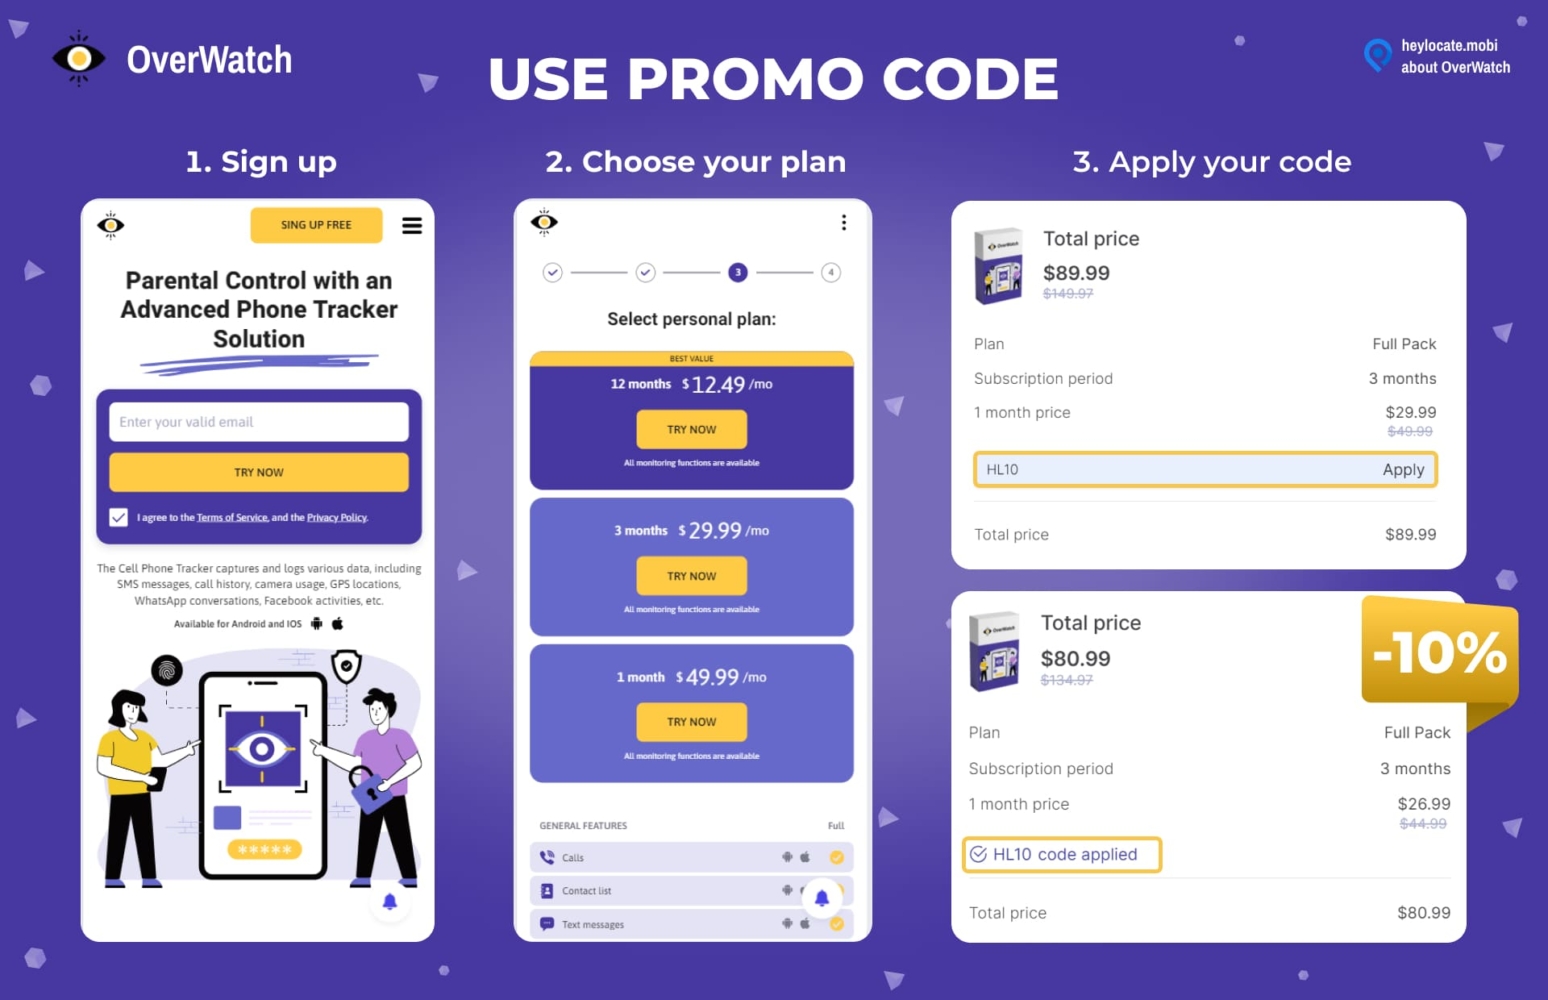 Explanatory graphic showing the step-by-step process of using heylocate promo code. Step 1: Register on the OverWatch website using your email. Step 2: Select a subscription package. Step 3: Go to the selected package and enter the promo code. Step 4: Activate the promo code and get 10% discount.